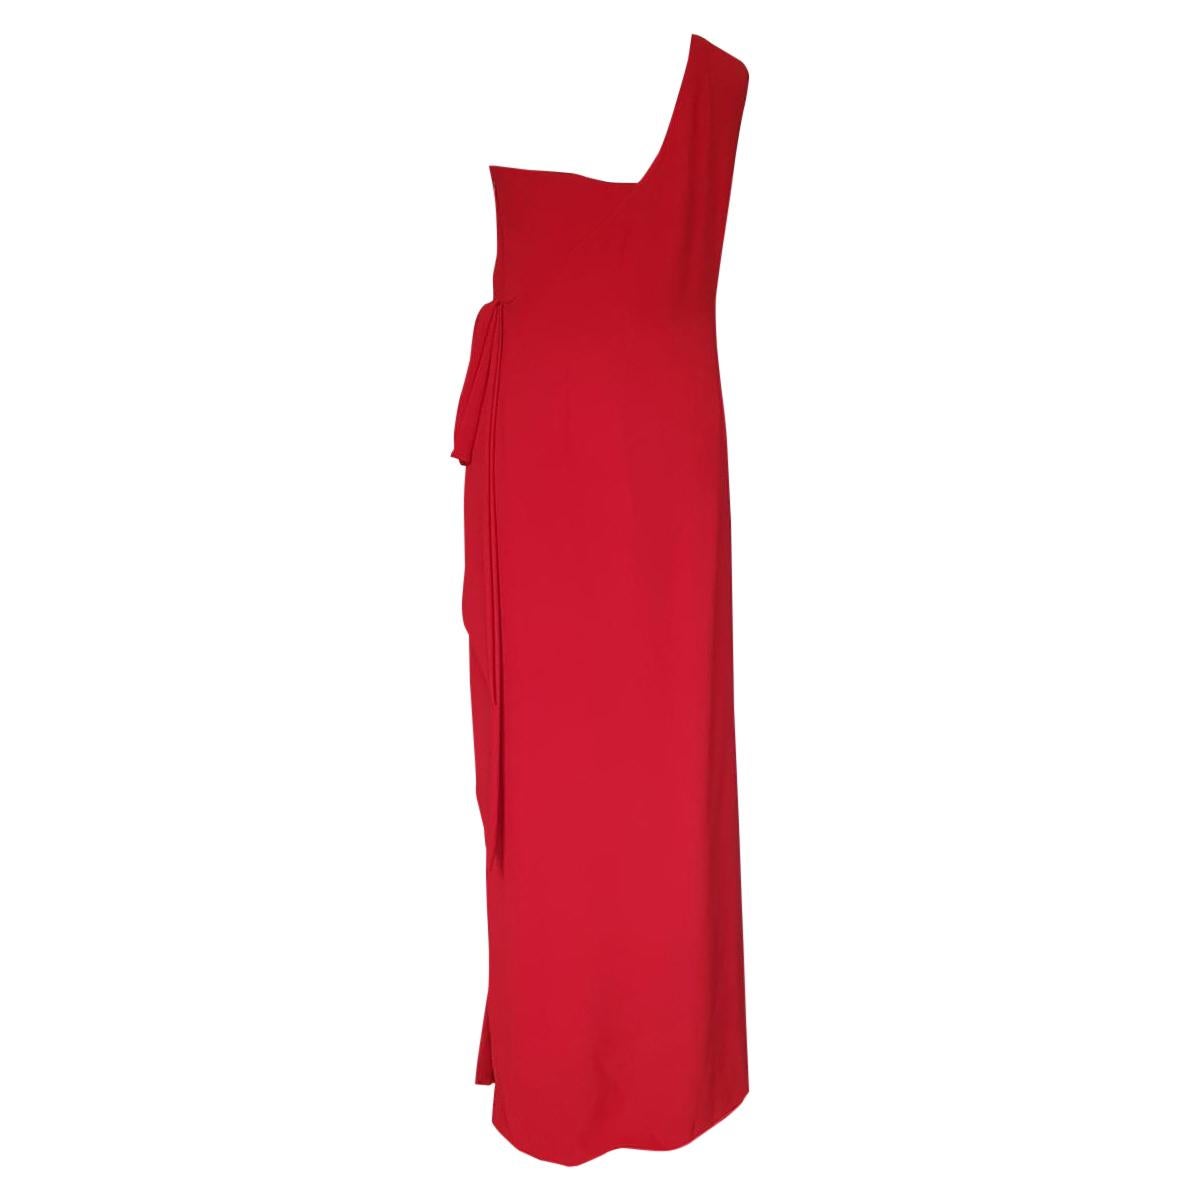 Spectacular dress by Andrea Odicini Couture
Silk
Bright red color
One shoulder
Amazing plissè work
Side drapery
Side zip closure
Total length cm 146 (57.5 inches)
Original price € 5000
Worldwide express shipping included in the price !